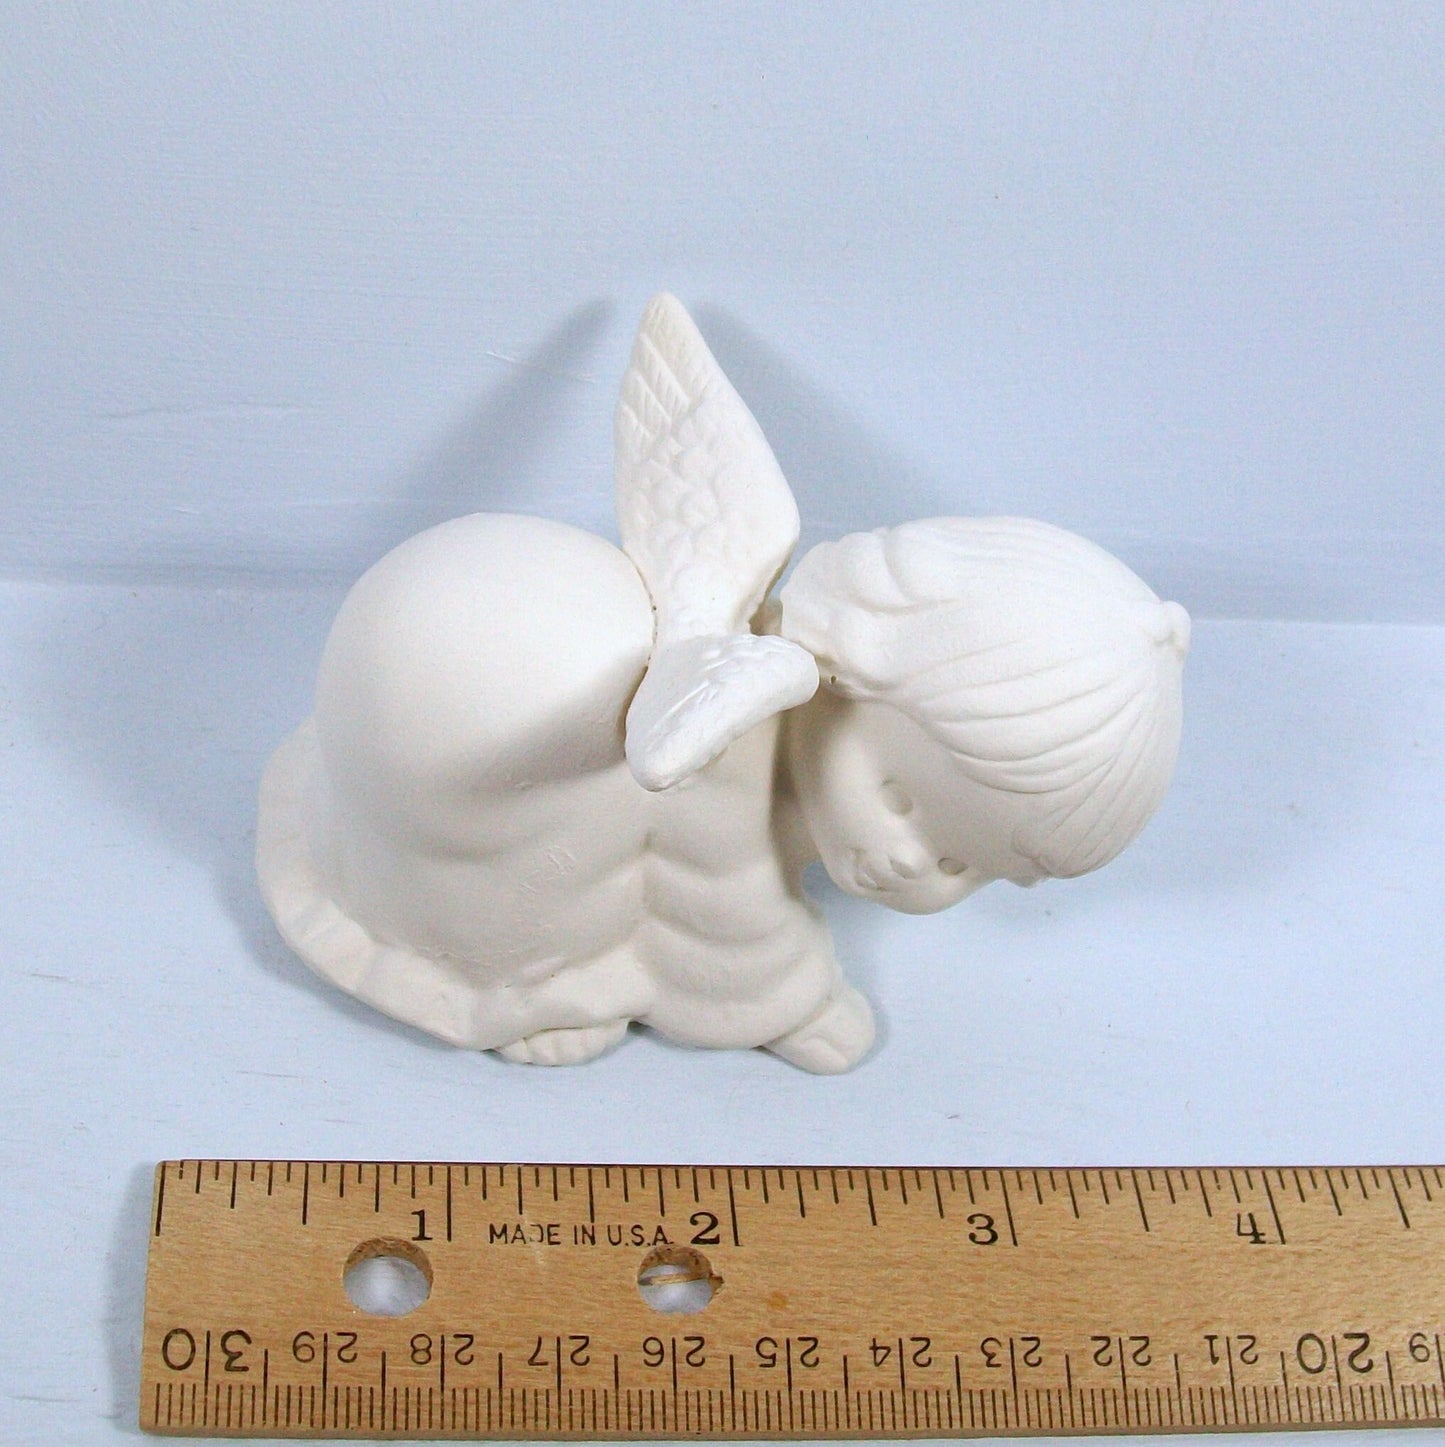 Unpainted ceramic angel statue on all 4's looking from above.  She has her wings outstretched and her head turned toward the right.  She is near a ruler showing her to be approximately 3 1/2 inches long.